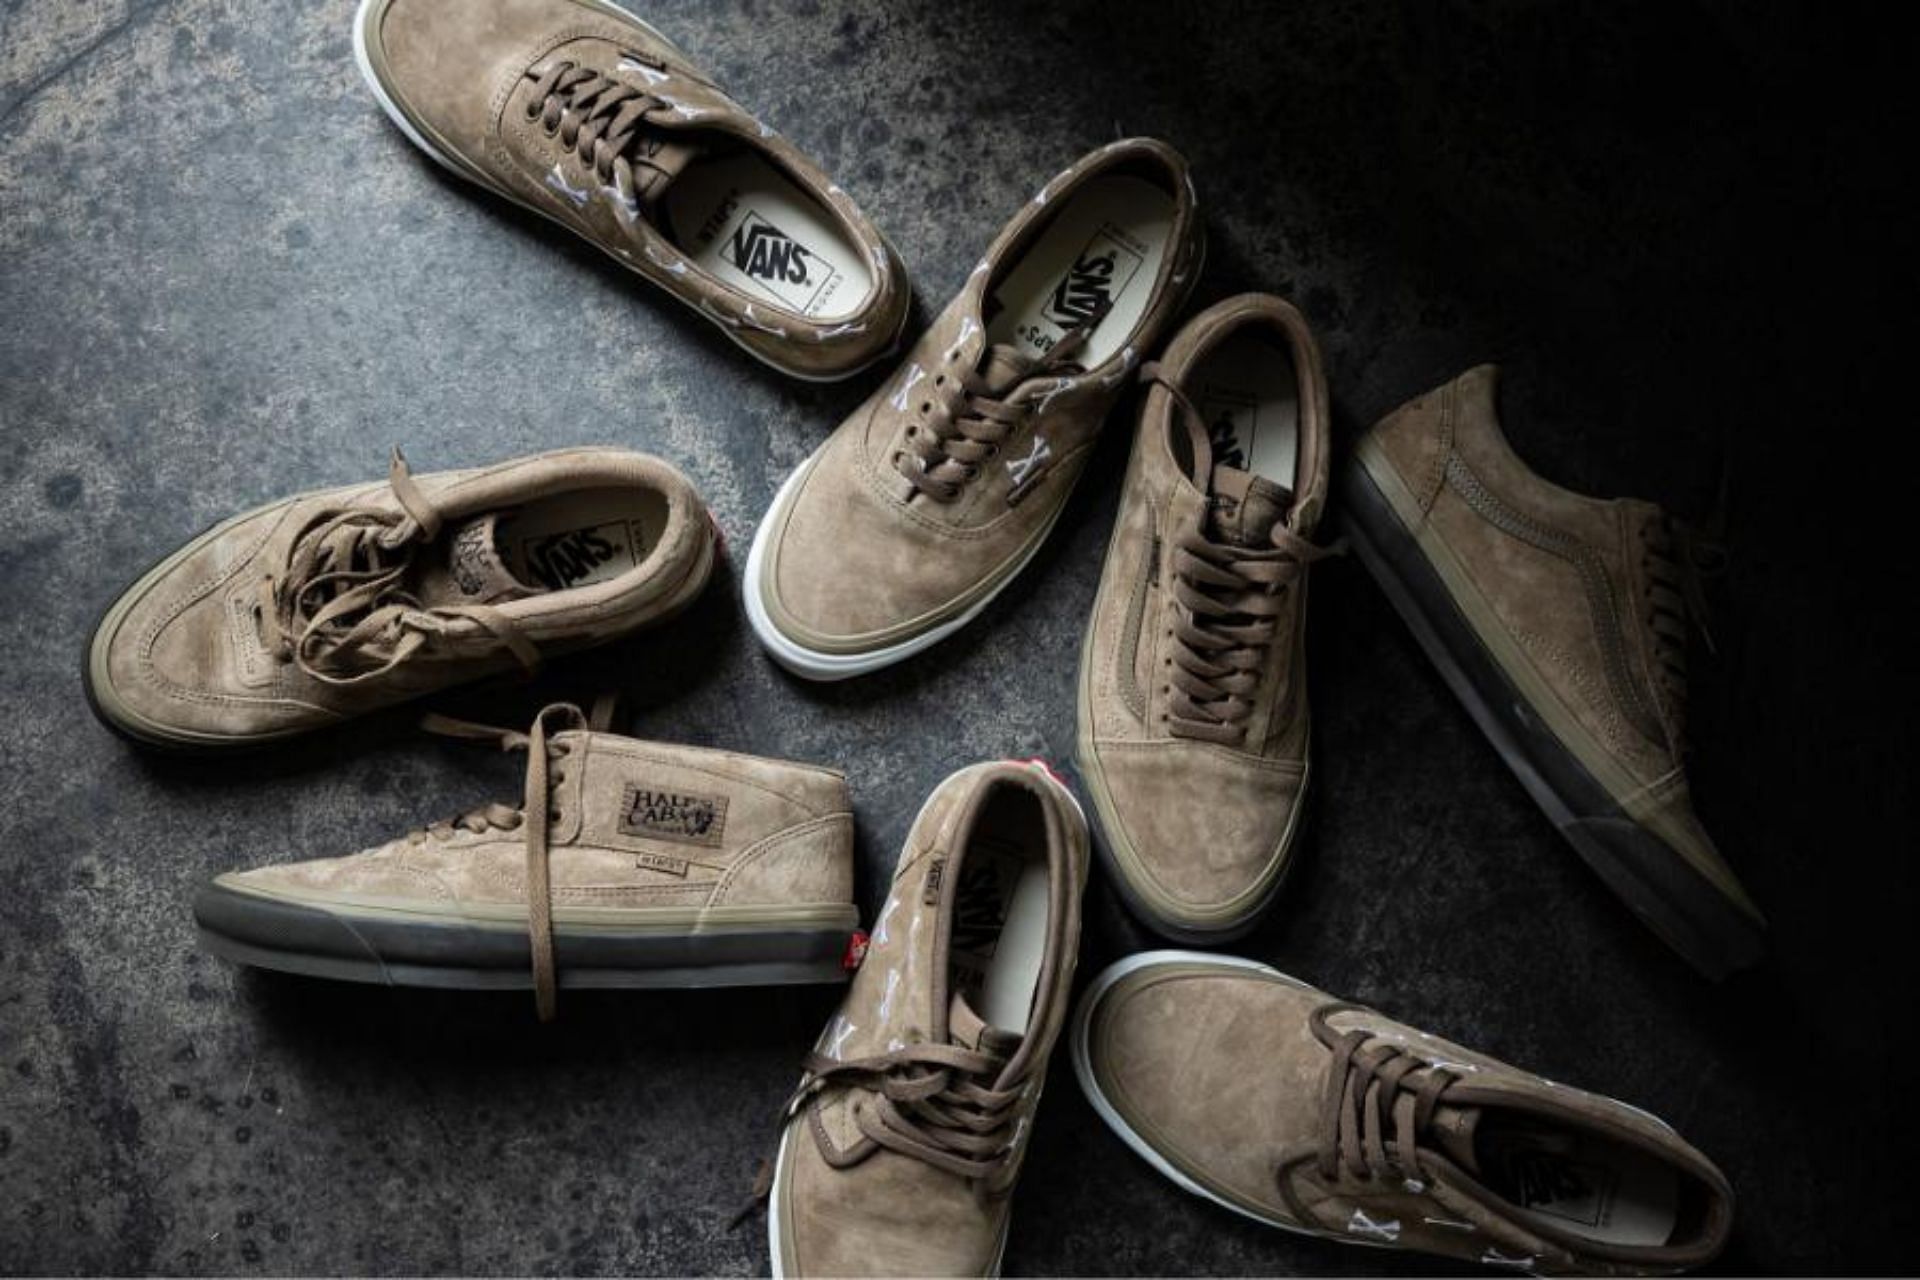 Where to buy the WTaps x Vans collection? Price, release date, and more